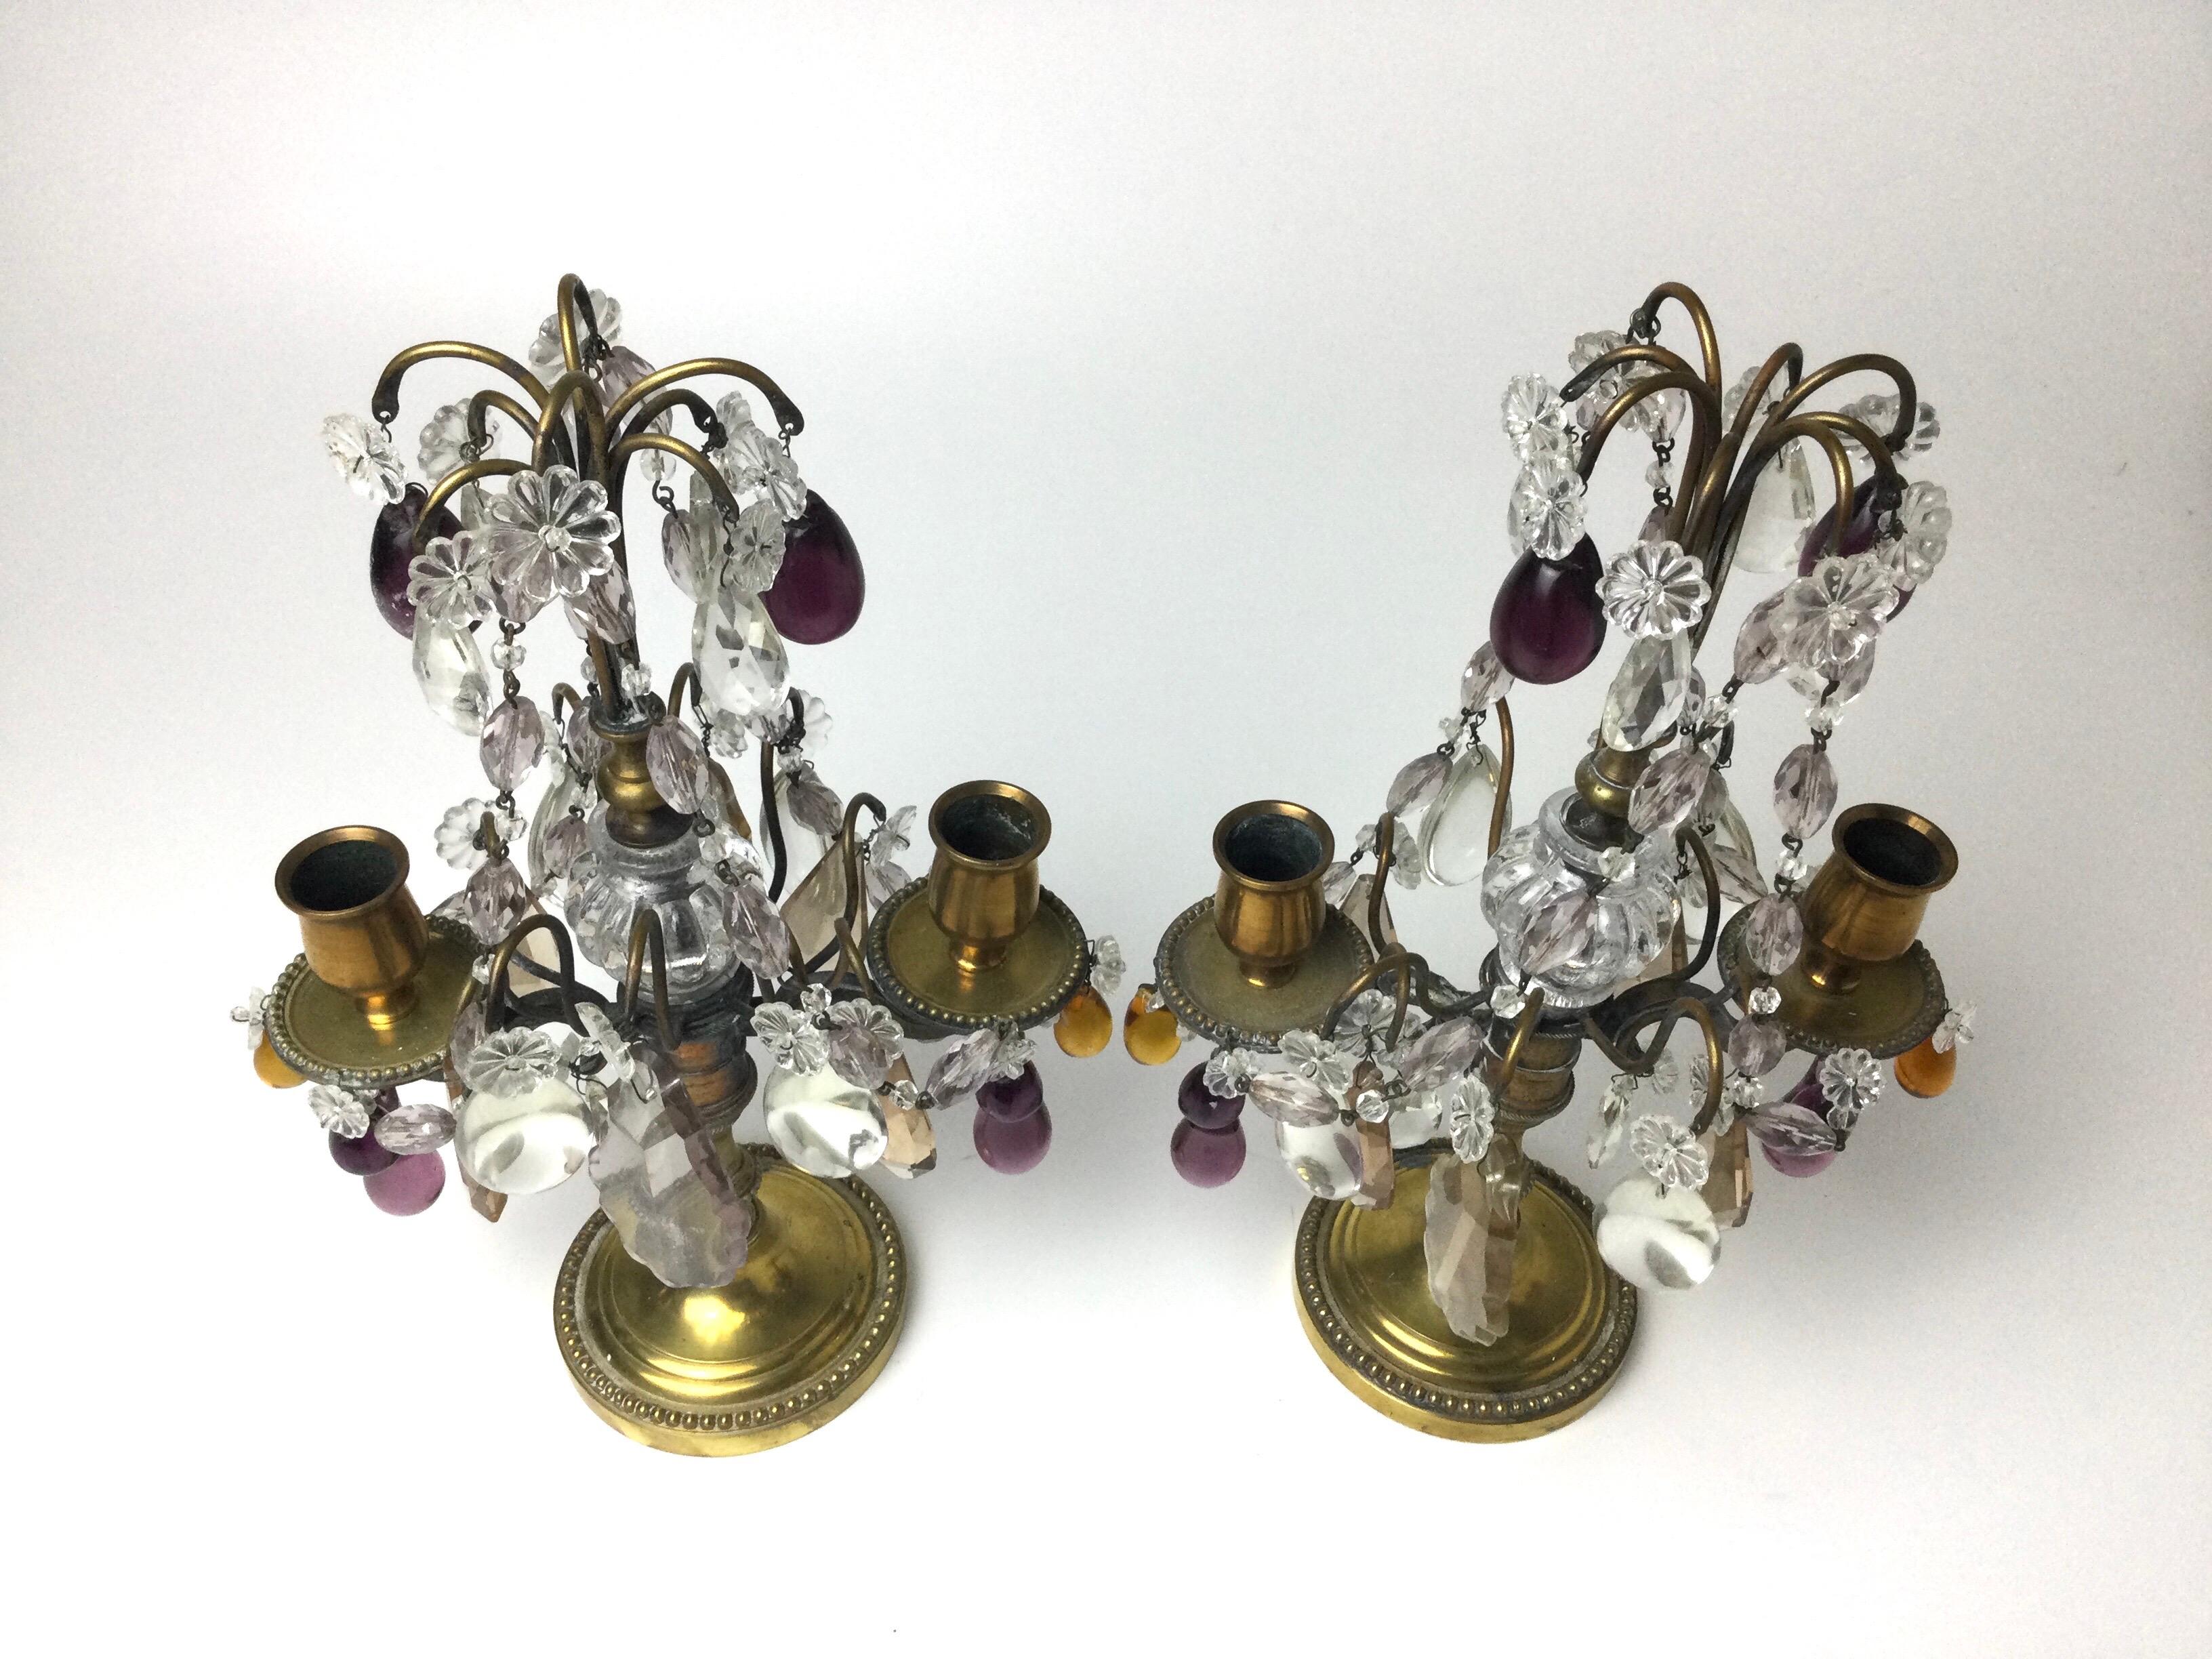 Pair of Girandoles candelabras with clear amethyst and amber crystals. Double candle light. Lots of crystals all intact. Mark on both bases. Please note all images.